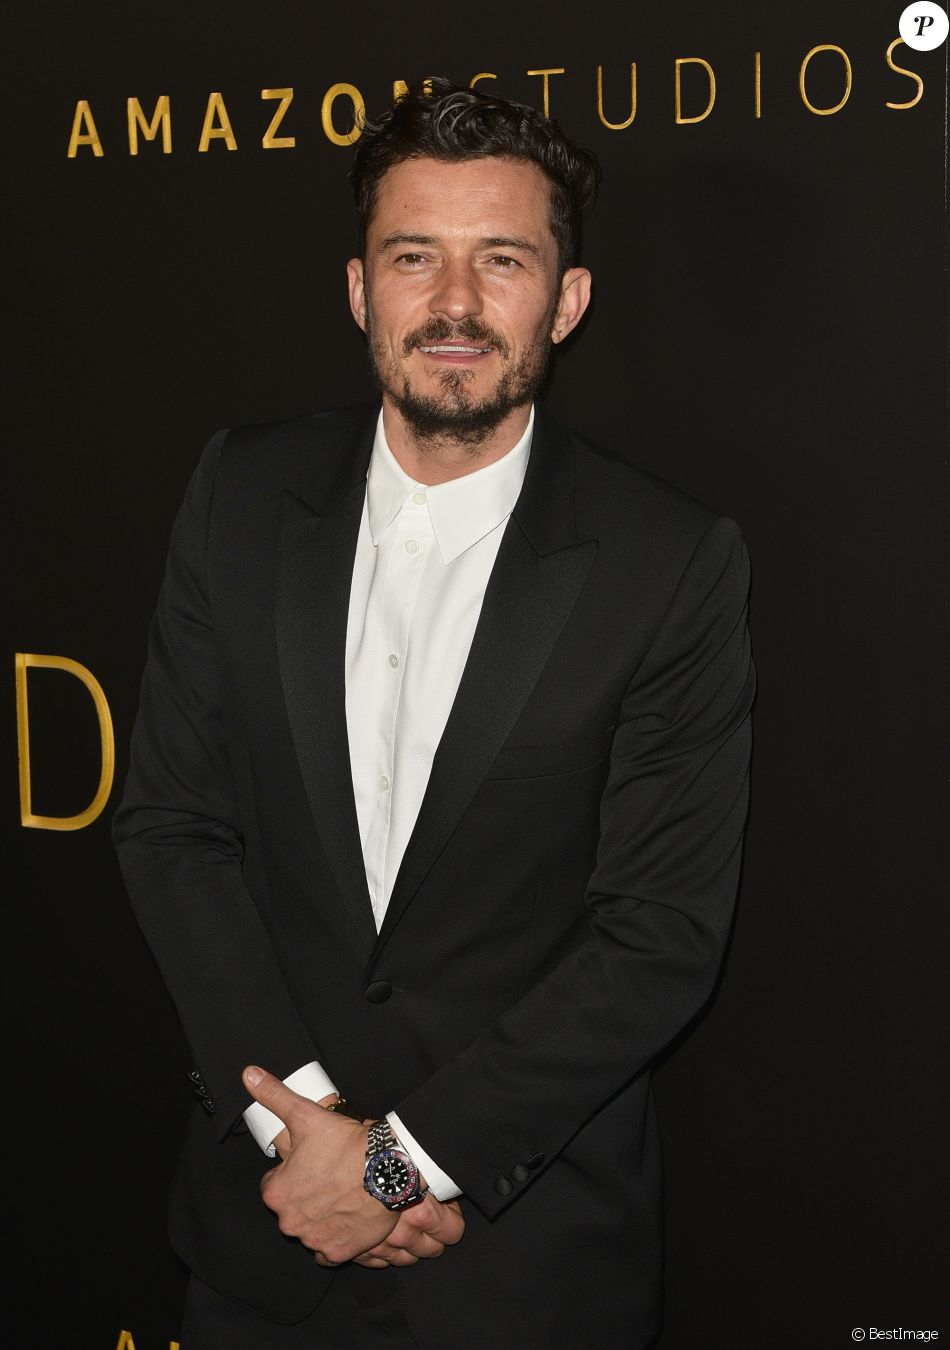 https://static1.purepeople.com/articles/9/37/47/59/@/5411831-orlando-bloom-after-party-amazon-stud-950x0-1.jpg